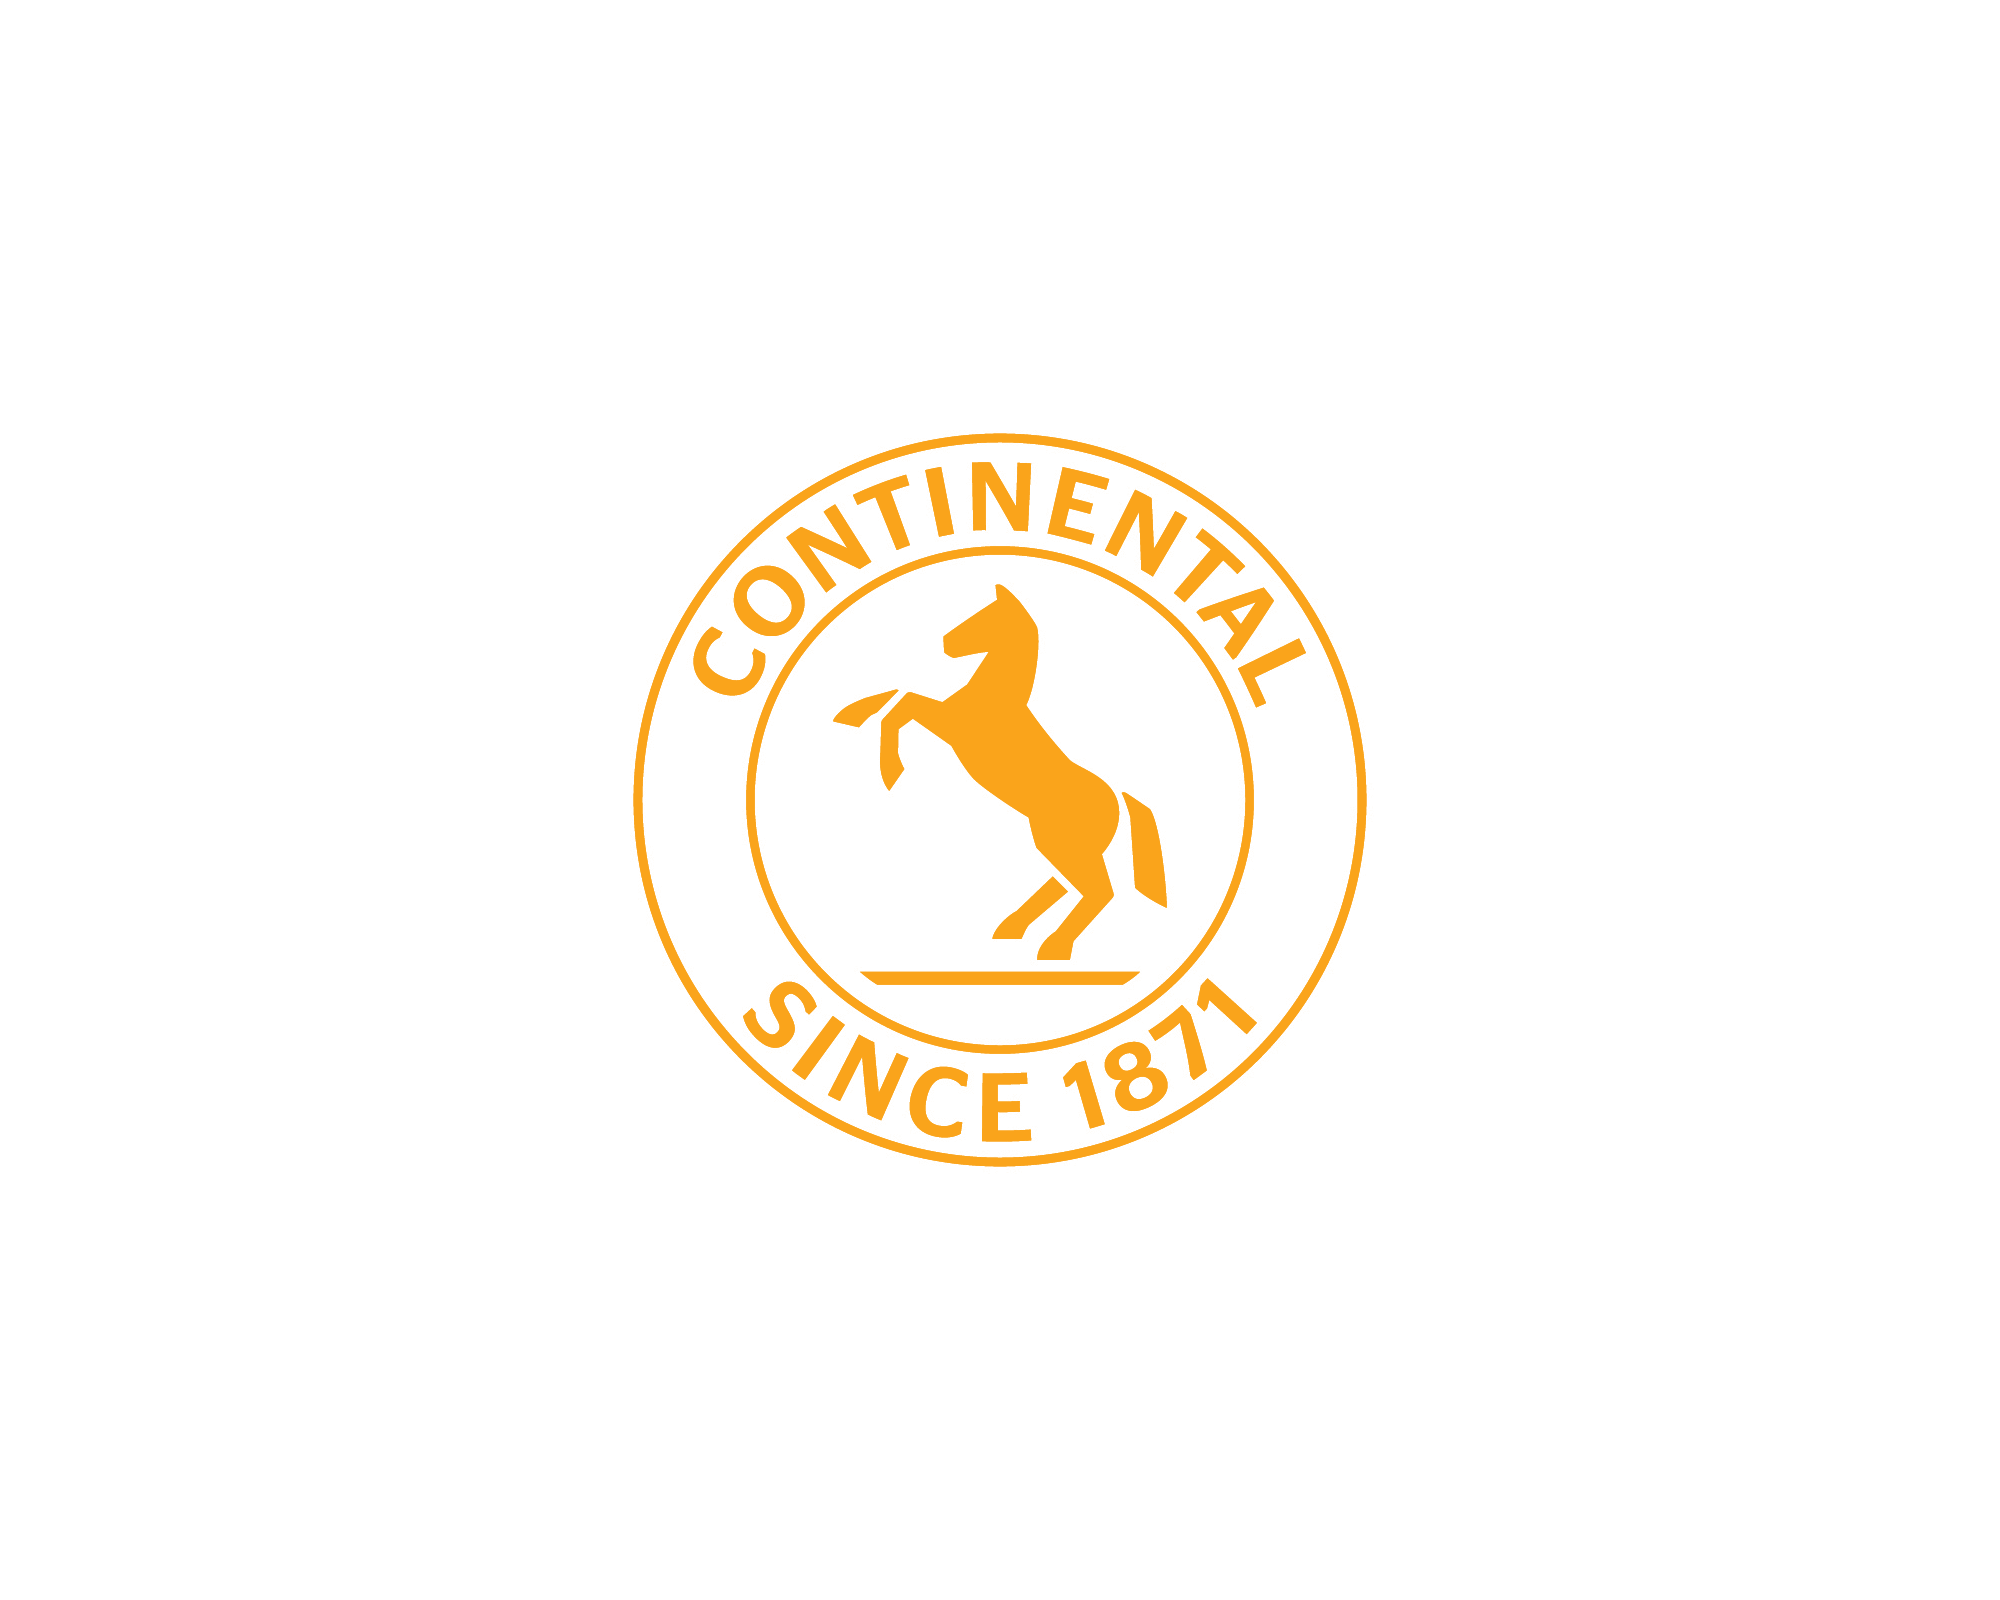 Continental Tires logo old